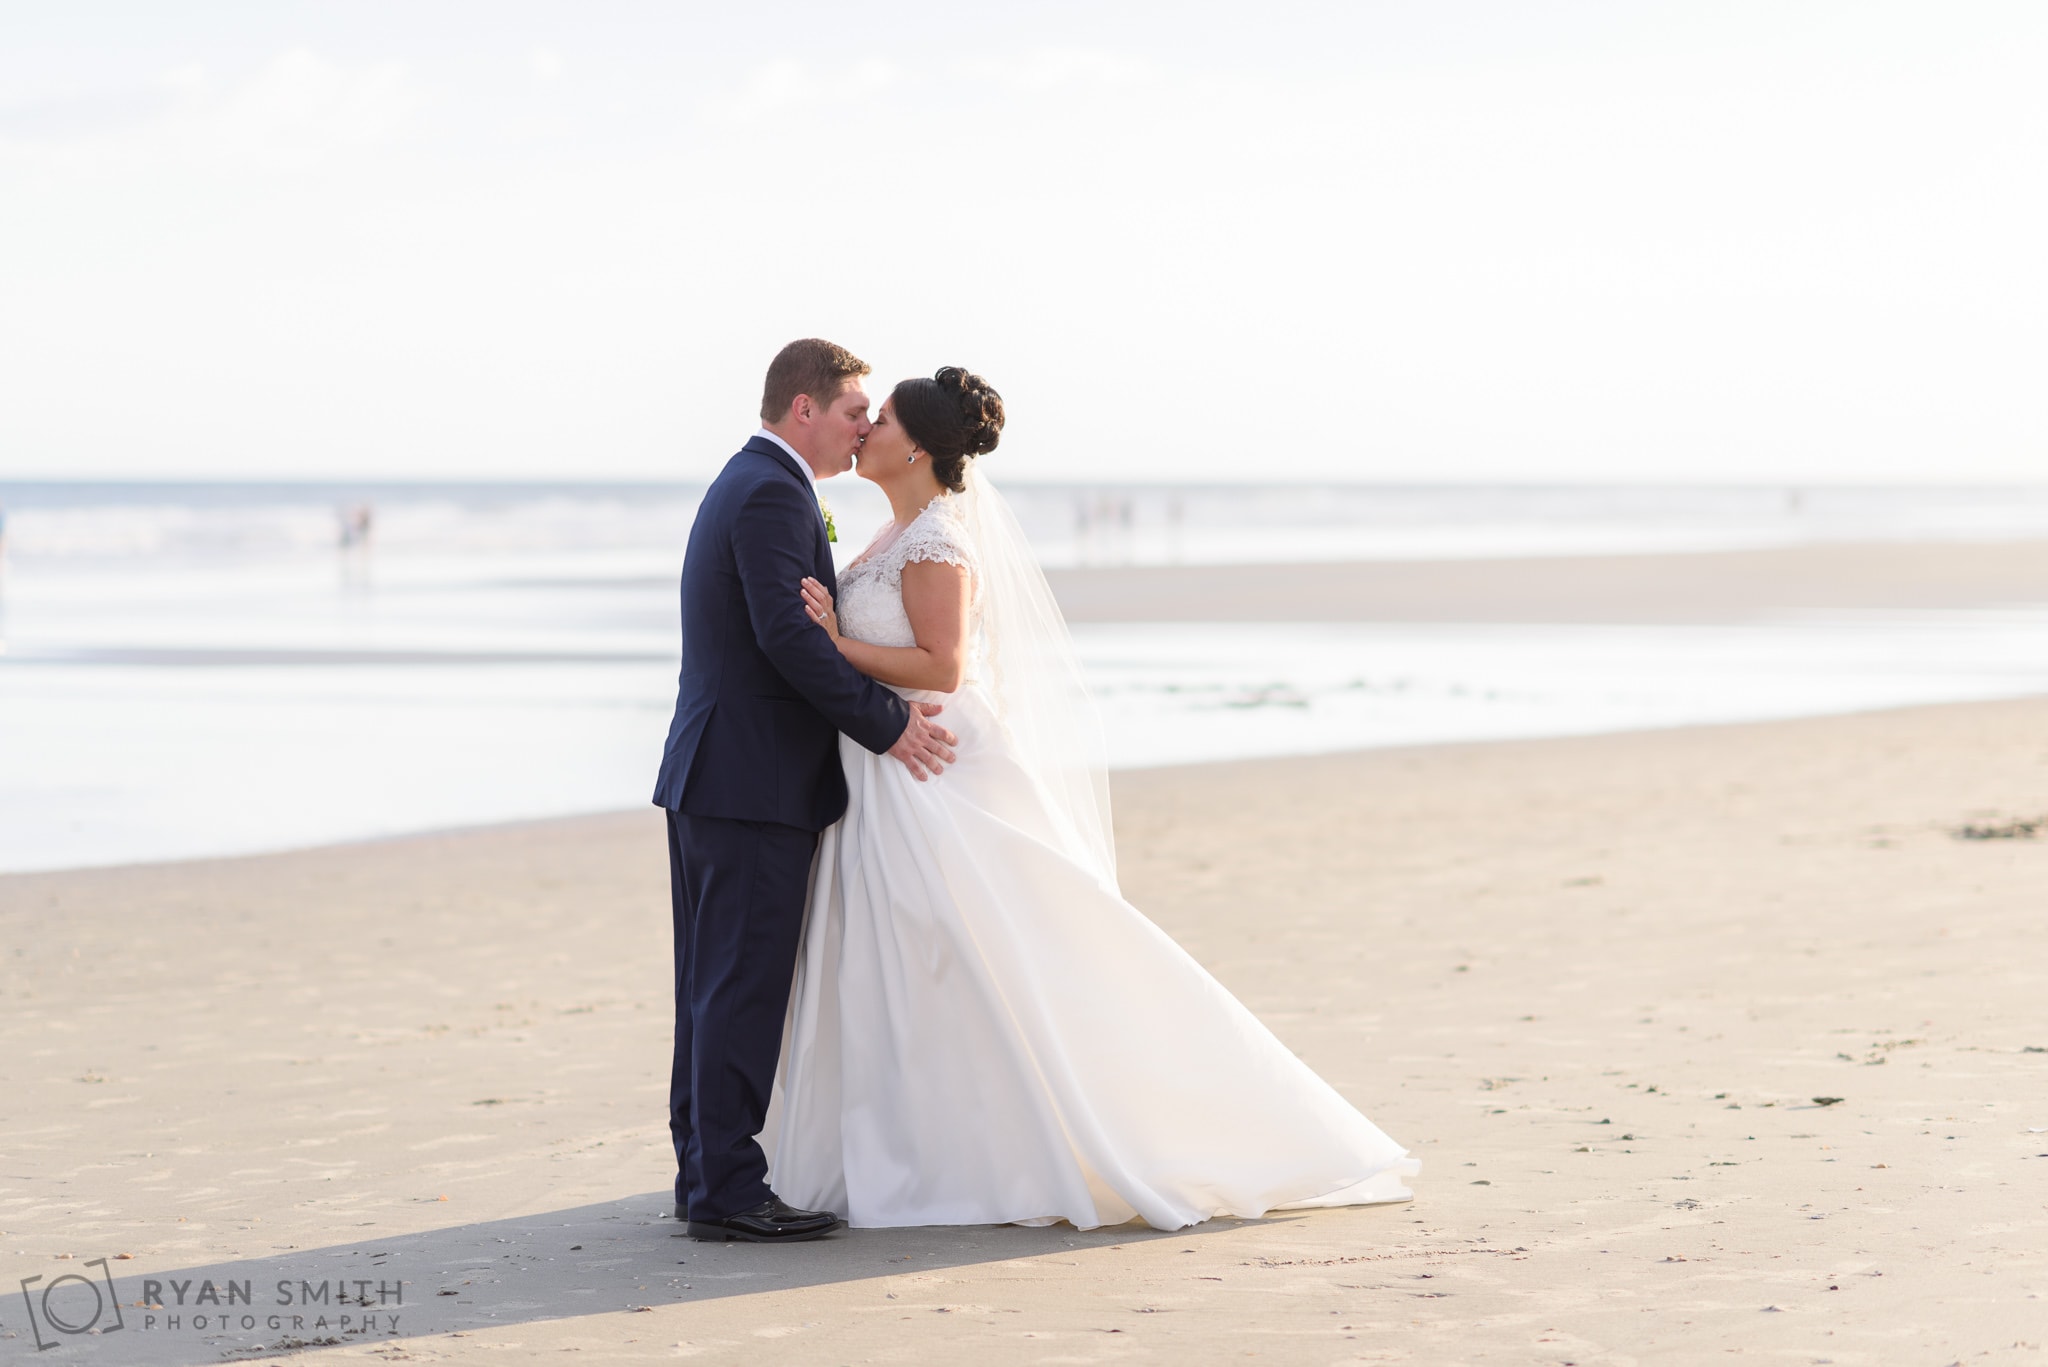 Pictures with the bride and groom on the beach - North Myrtle Beach